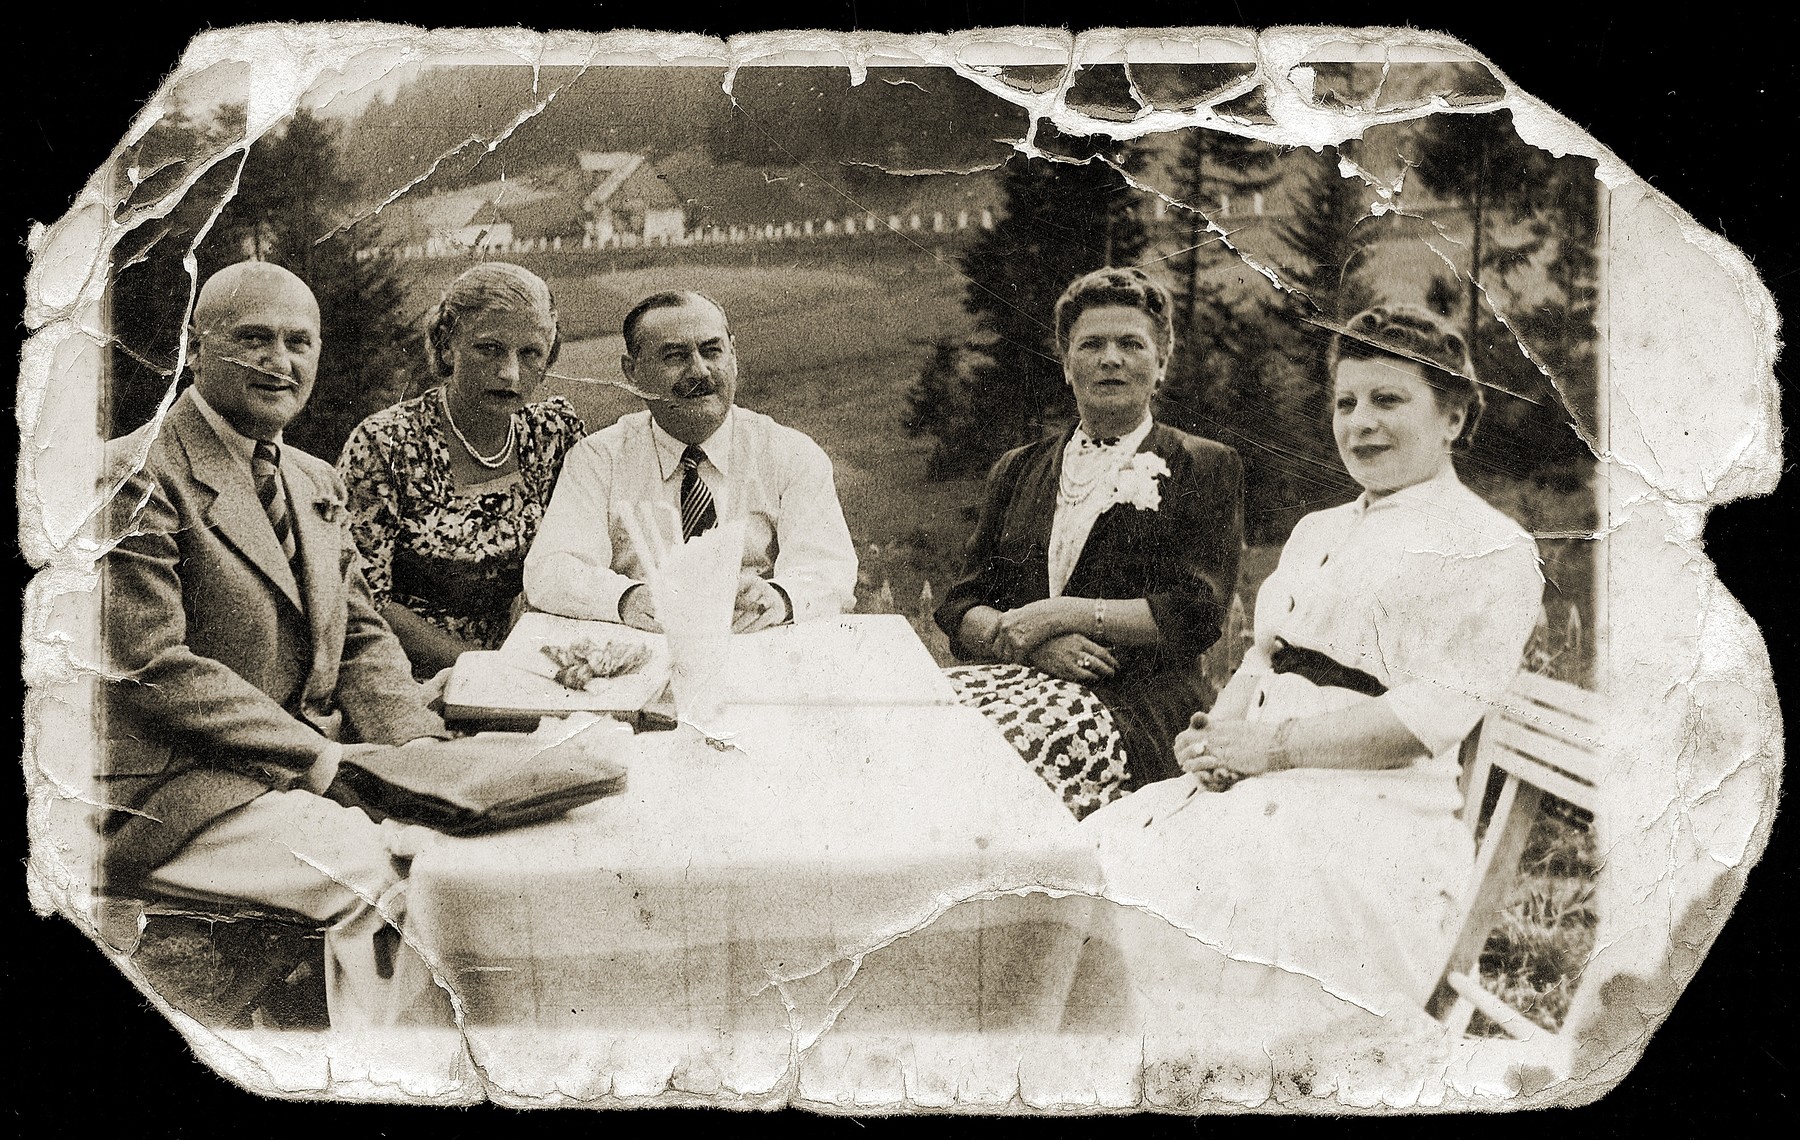 A group of friends sit outside around a table.

Pictured from left to right are: ? Pinkus, unknown, Simon Furstenberg, Helena (Goldminc) Furstenberg and Mania Pinkus.